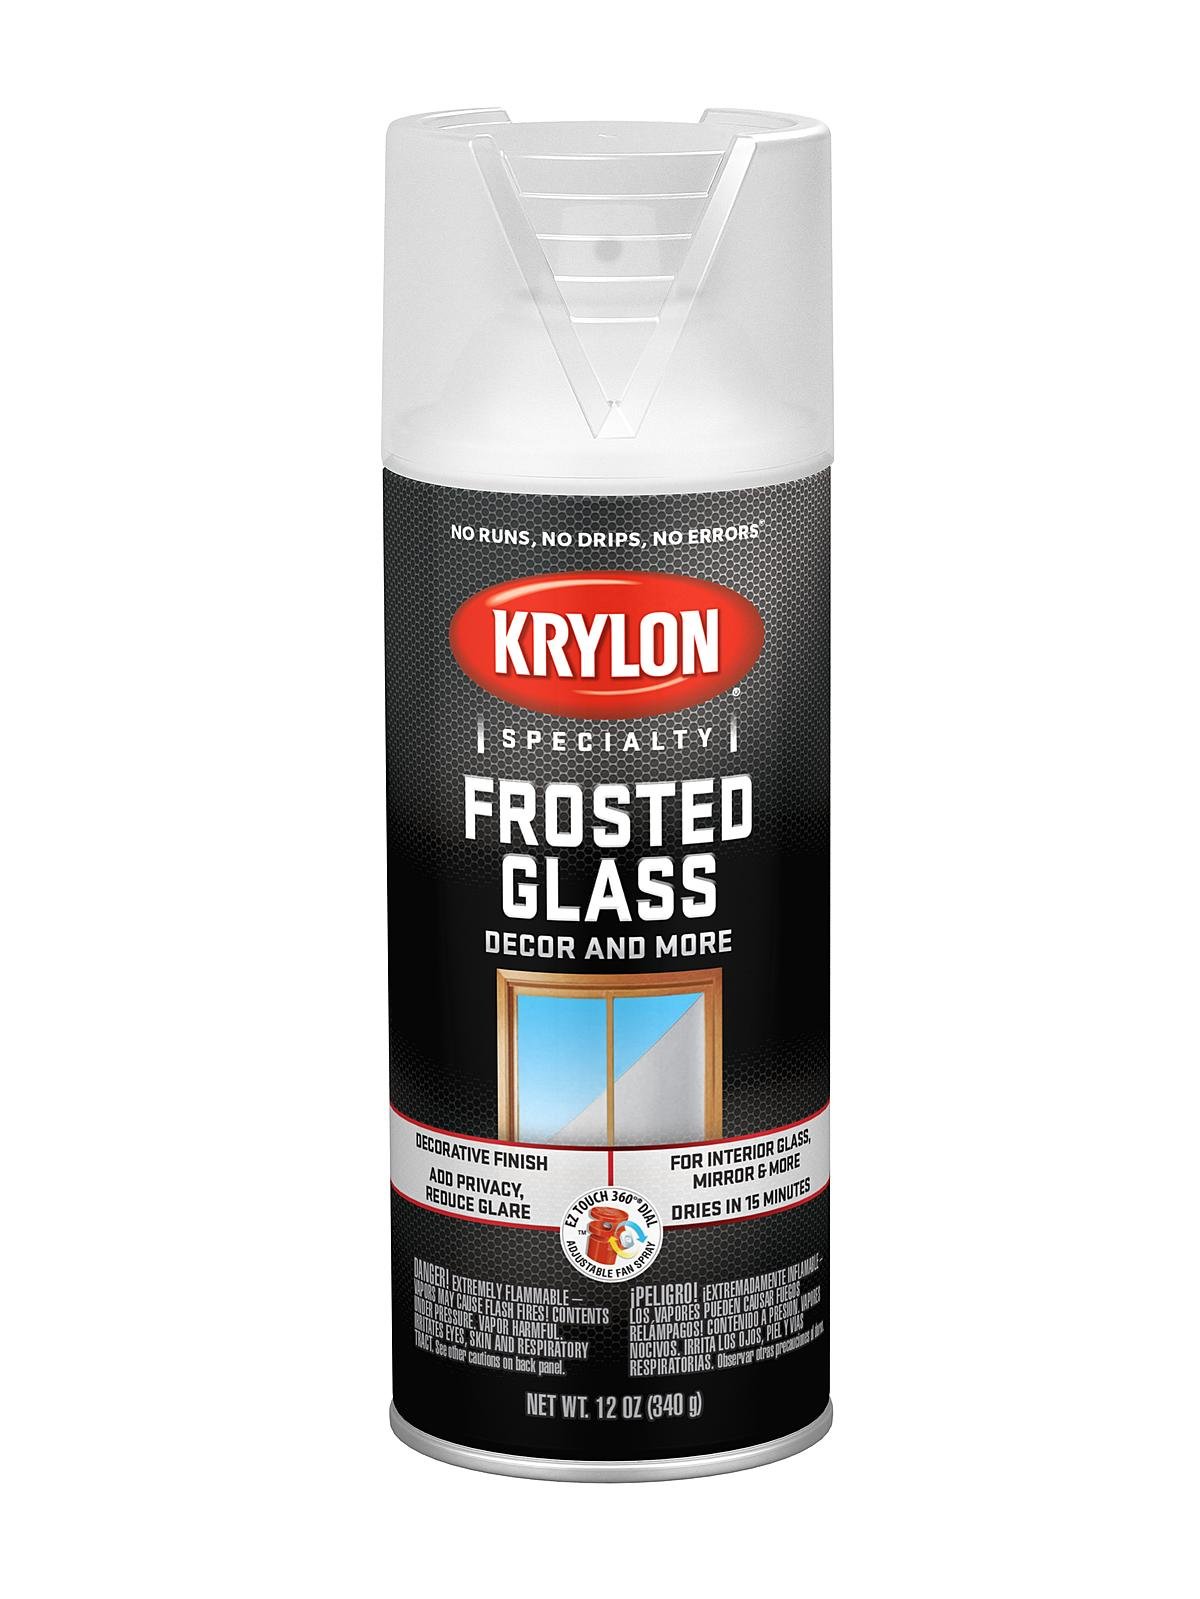 Privacy Window Glass Coating Paint Frosted Effect with Brush Waterproof 100g